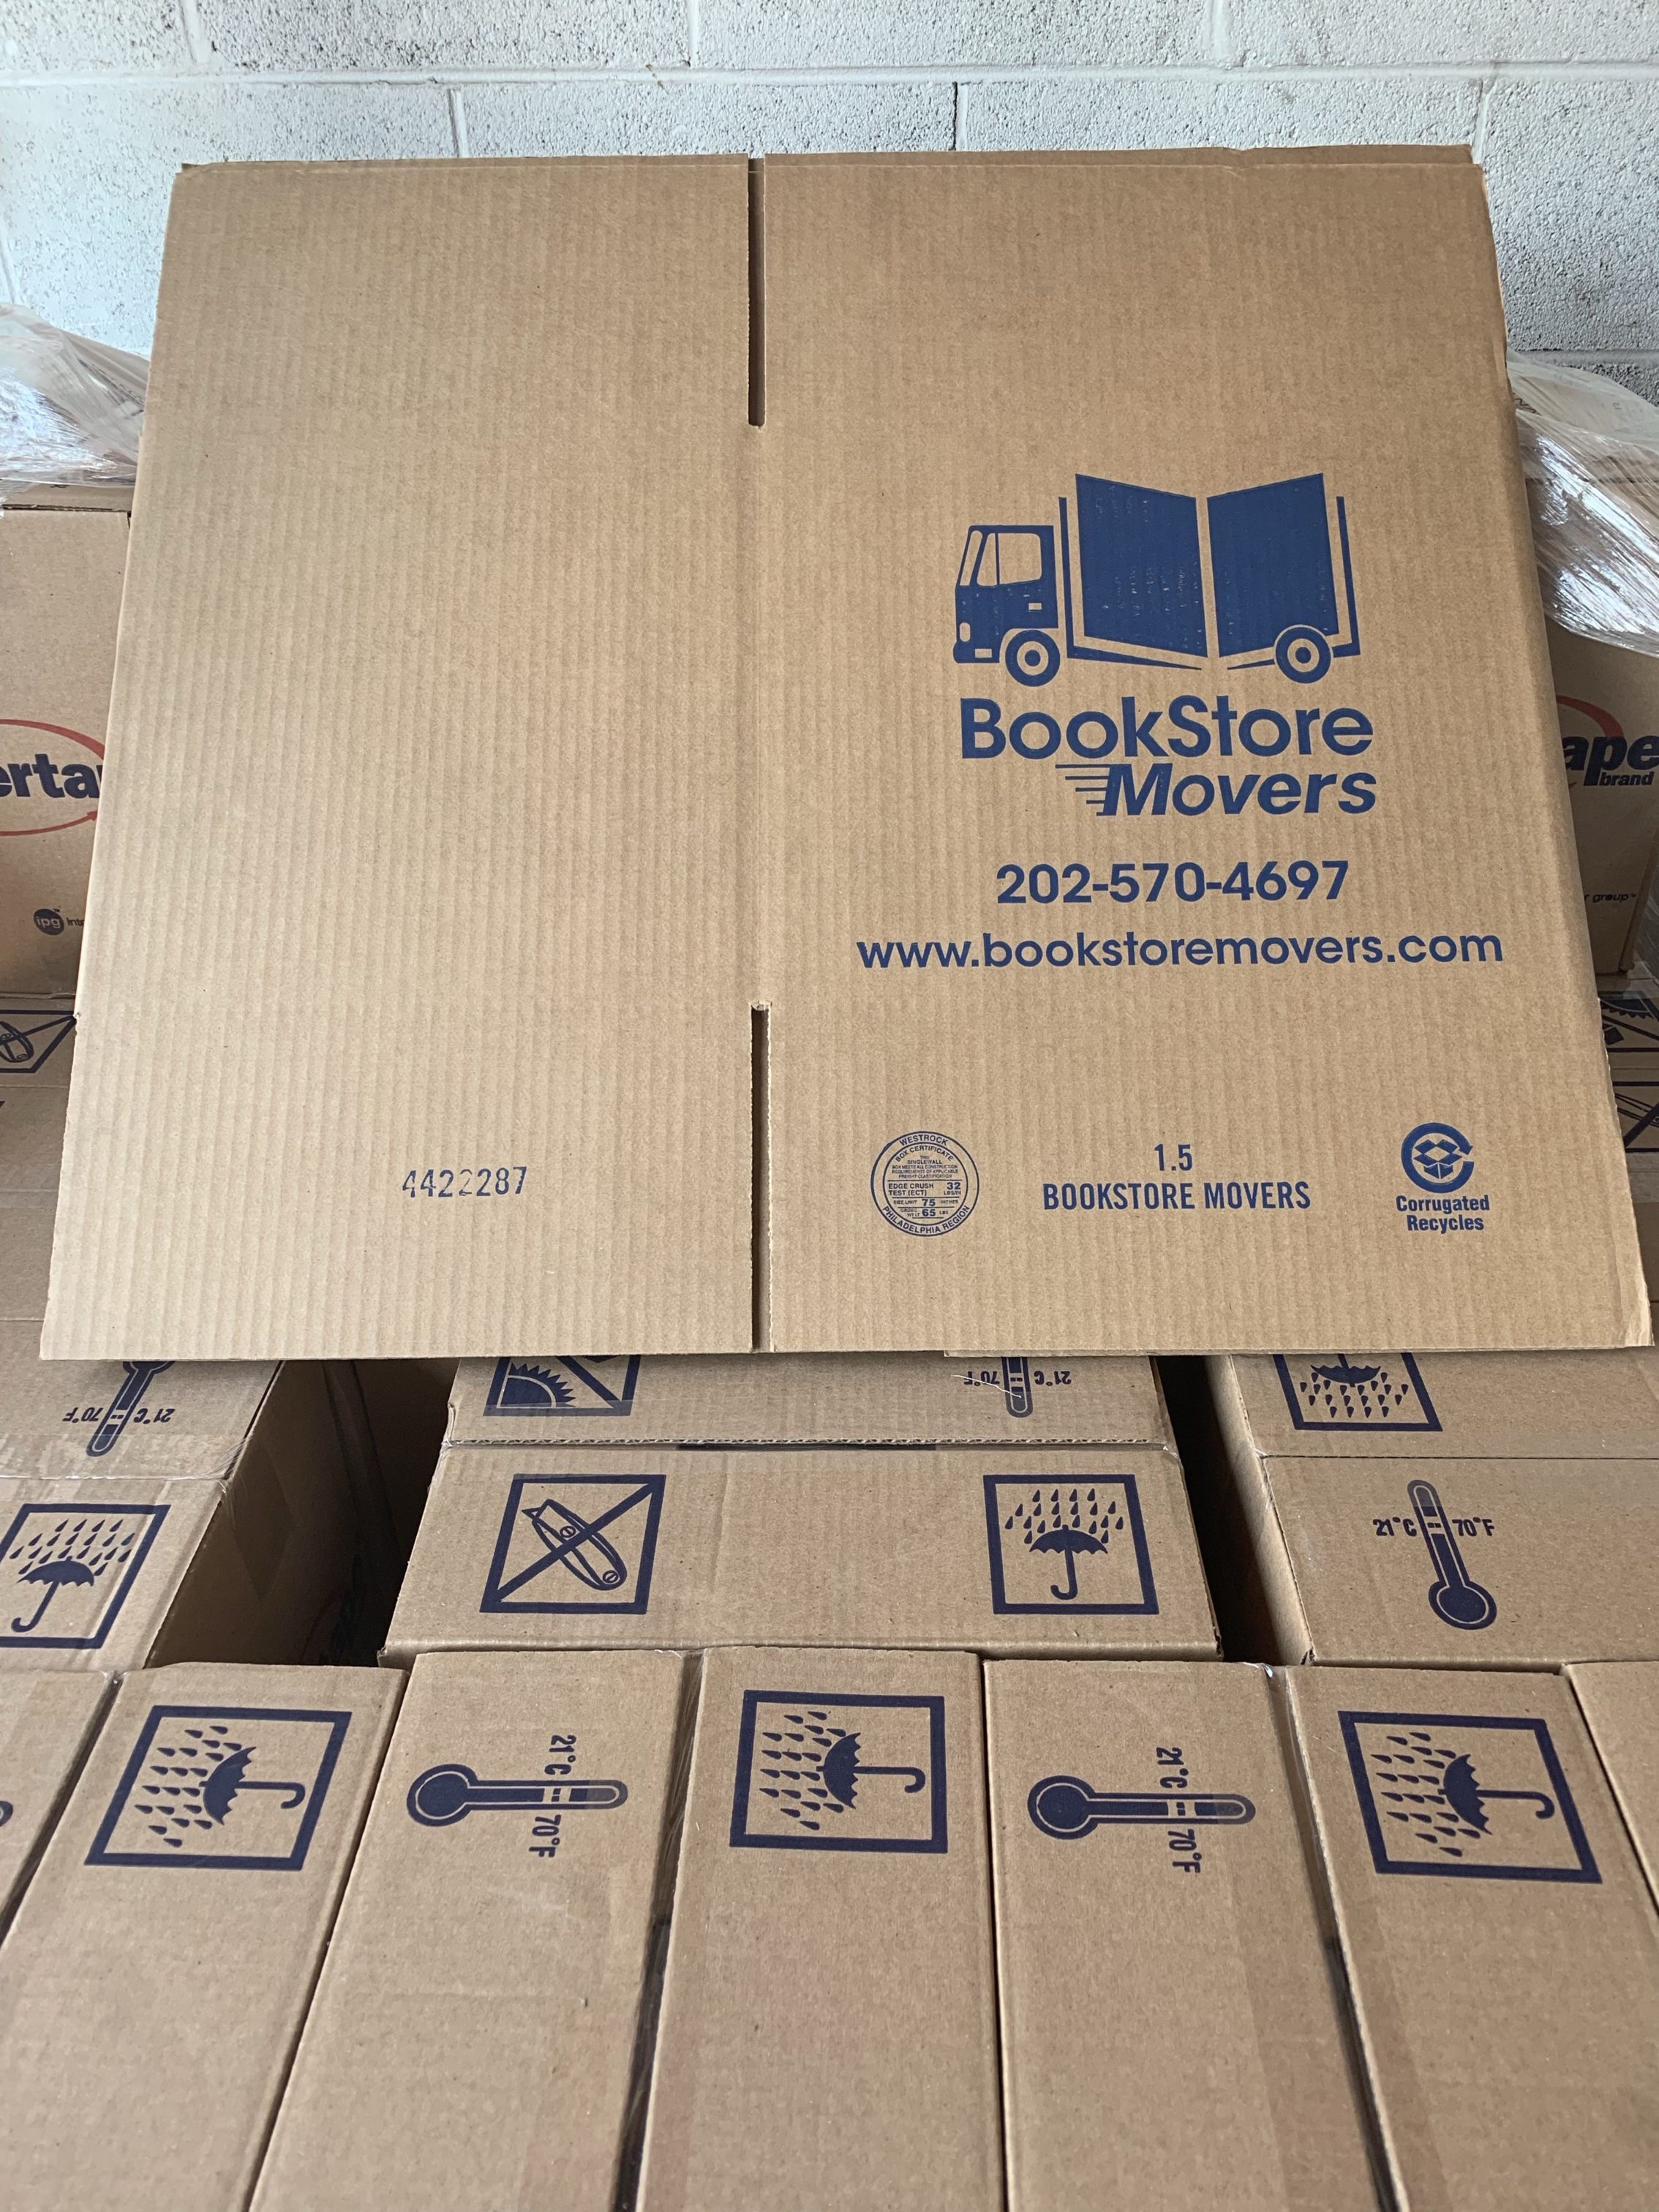 Why rent moving supplies even if you are not hiring movers - Capital City  Bins